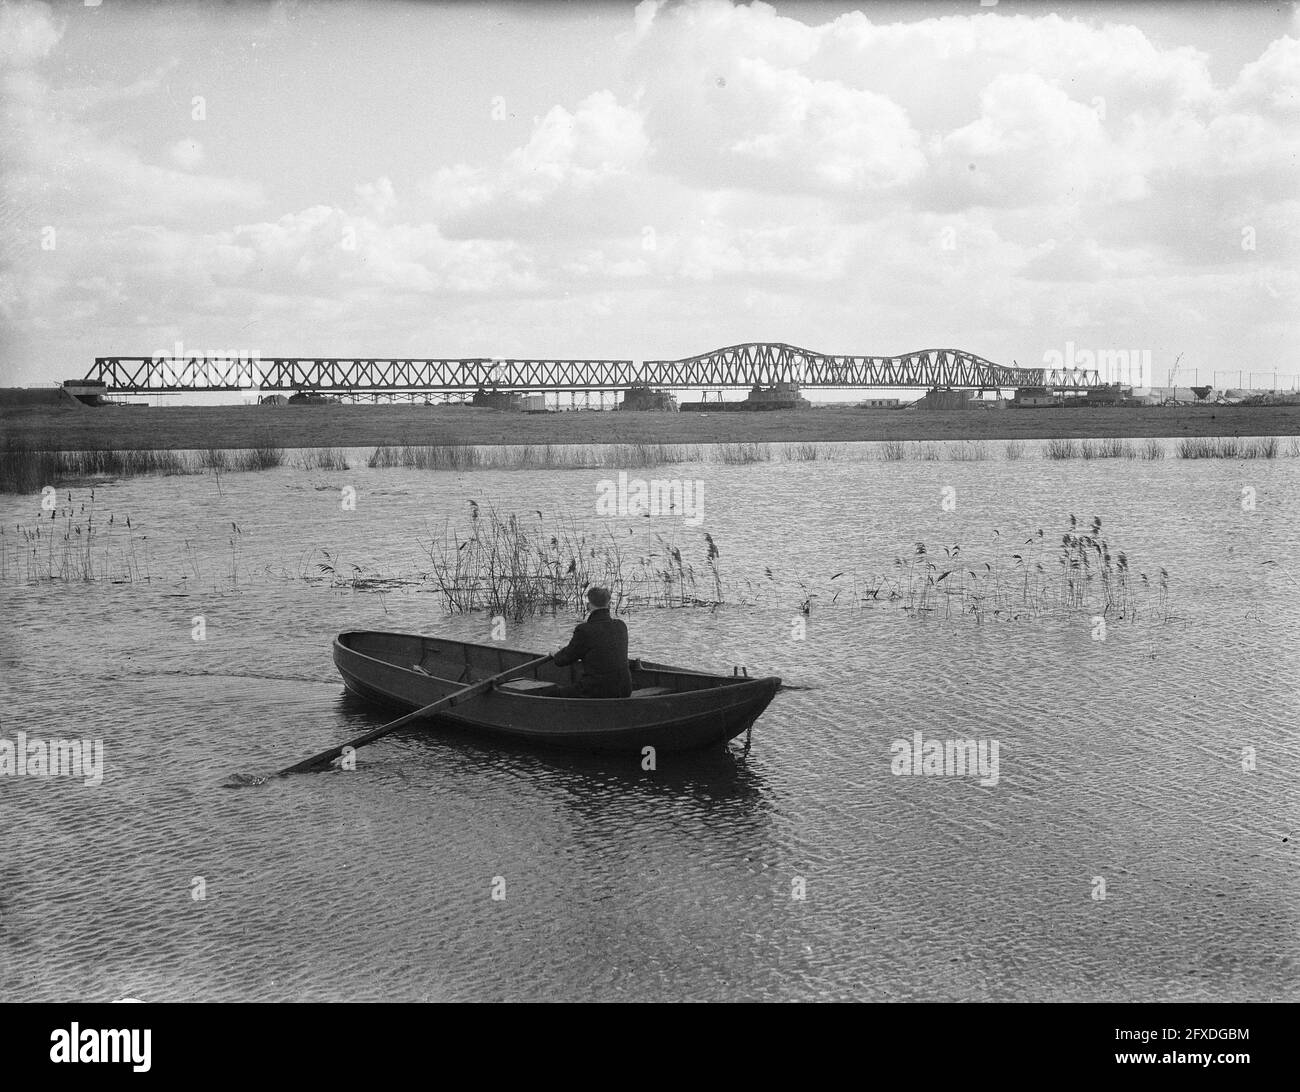 Railway bridge at Hedel, 25 March 1947, bridges, rivers, rowing boats, railroads, The Netherlands, 20th century press agency photo, news to remember, documentary, historic photography 1945-1990, visual stories, human history of the Twentieth Century, capturing moments in time Stock Photo